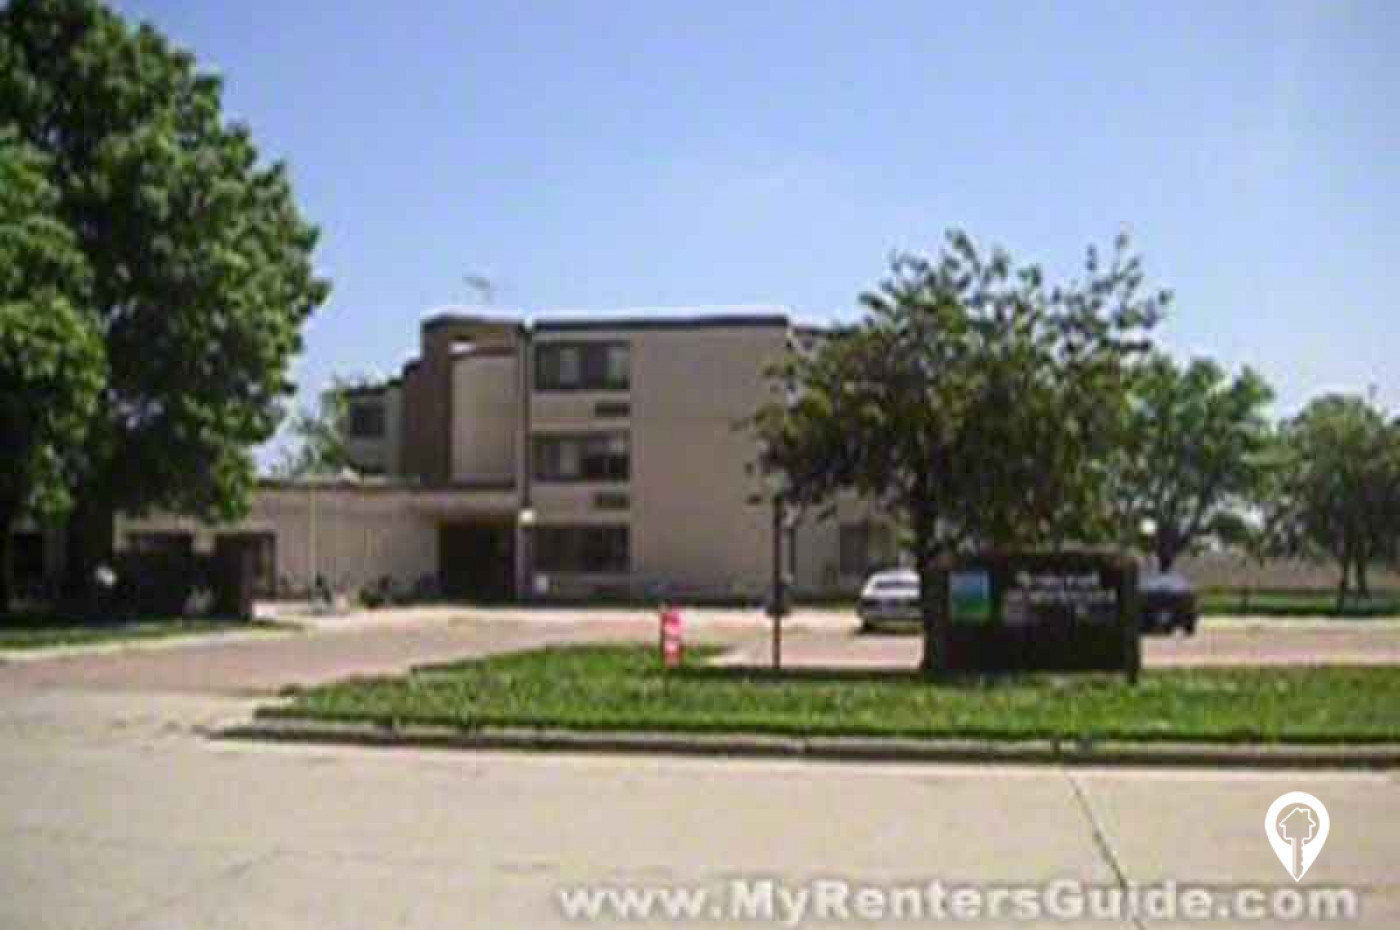  Apartments In Holstein Iowa for Small Space